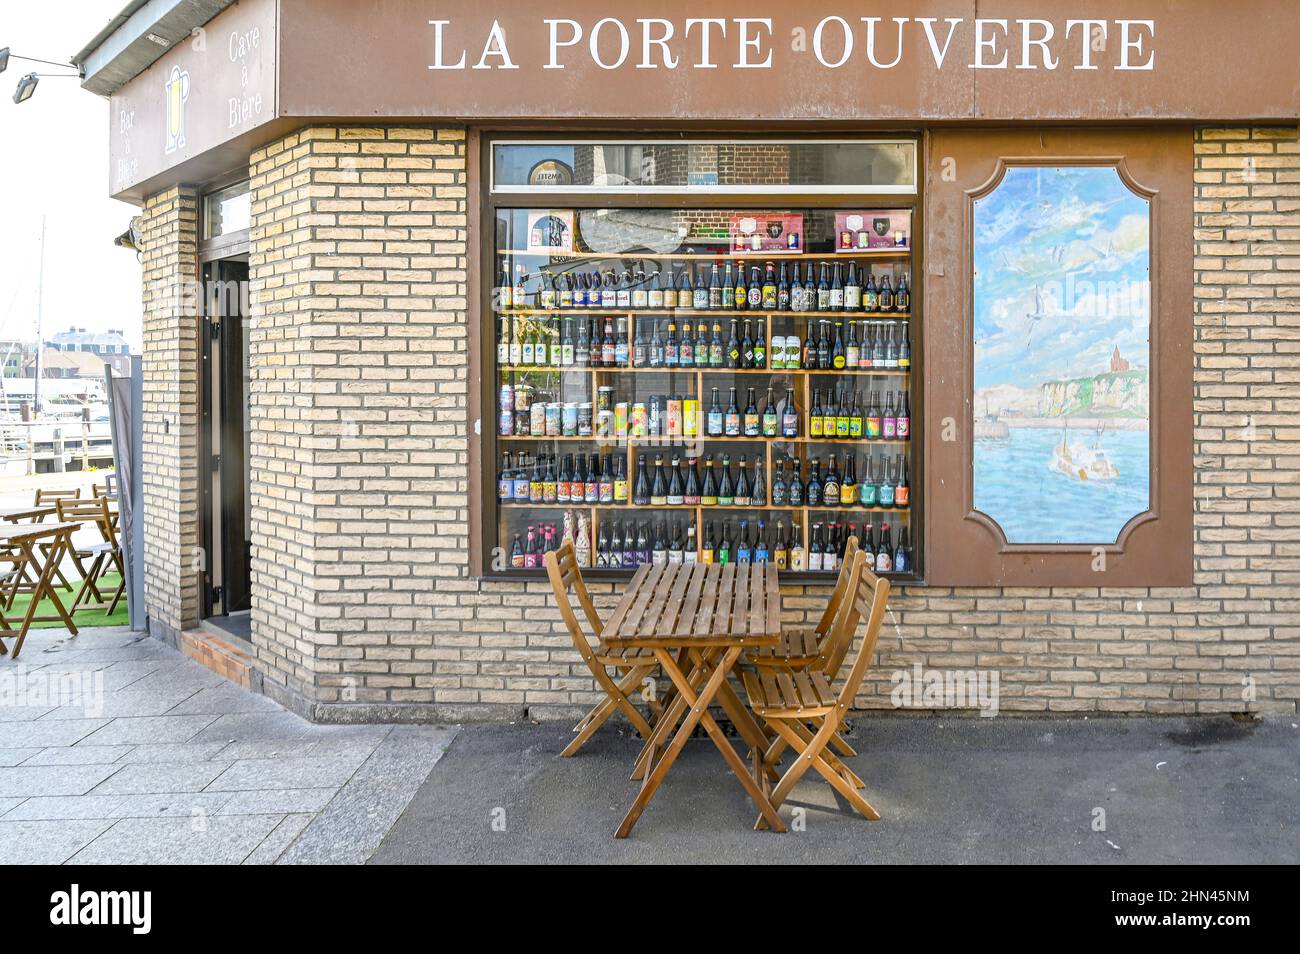 La Porte Ouverte is a popular craft beer shop in Dieppe, France Stock Photo  - Alamy